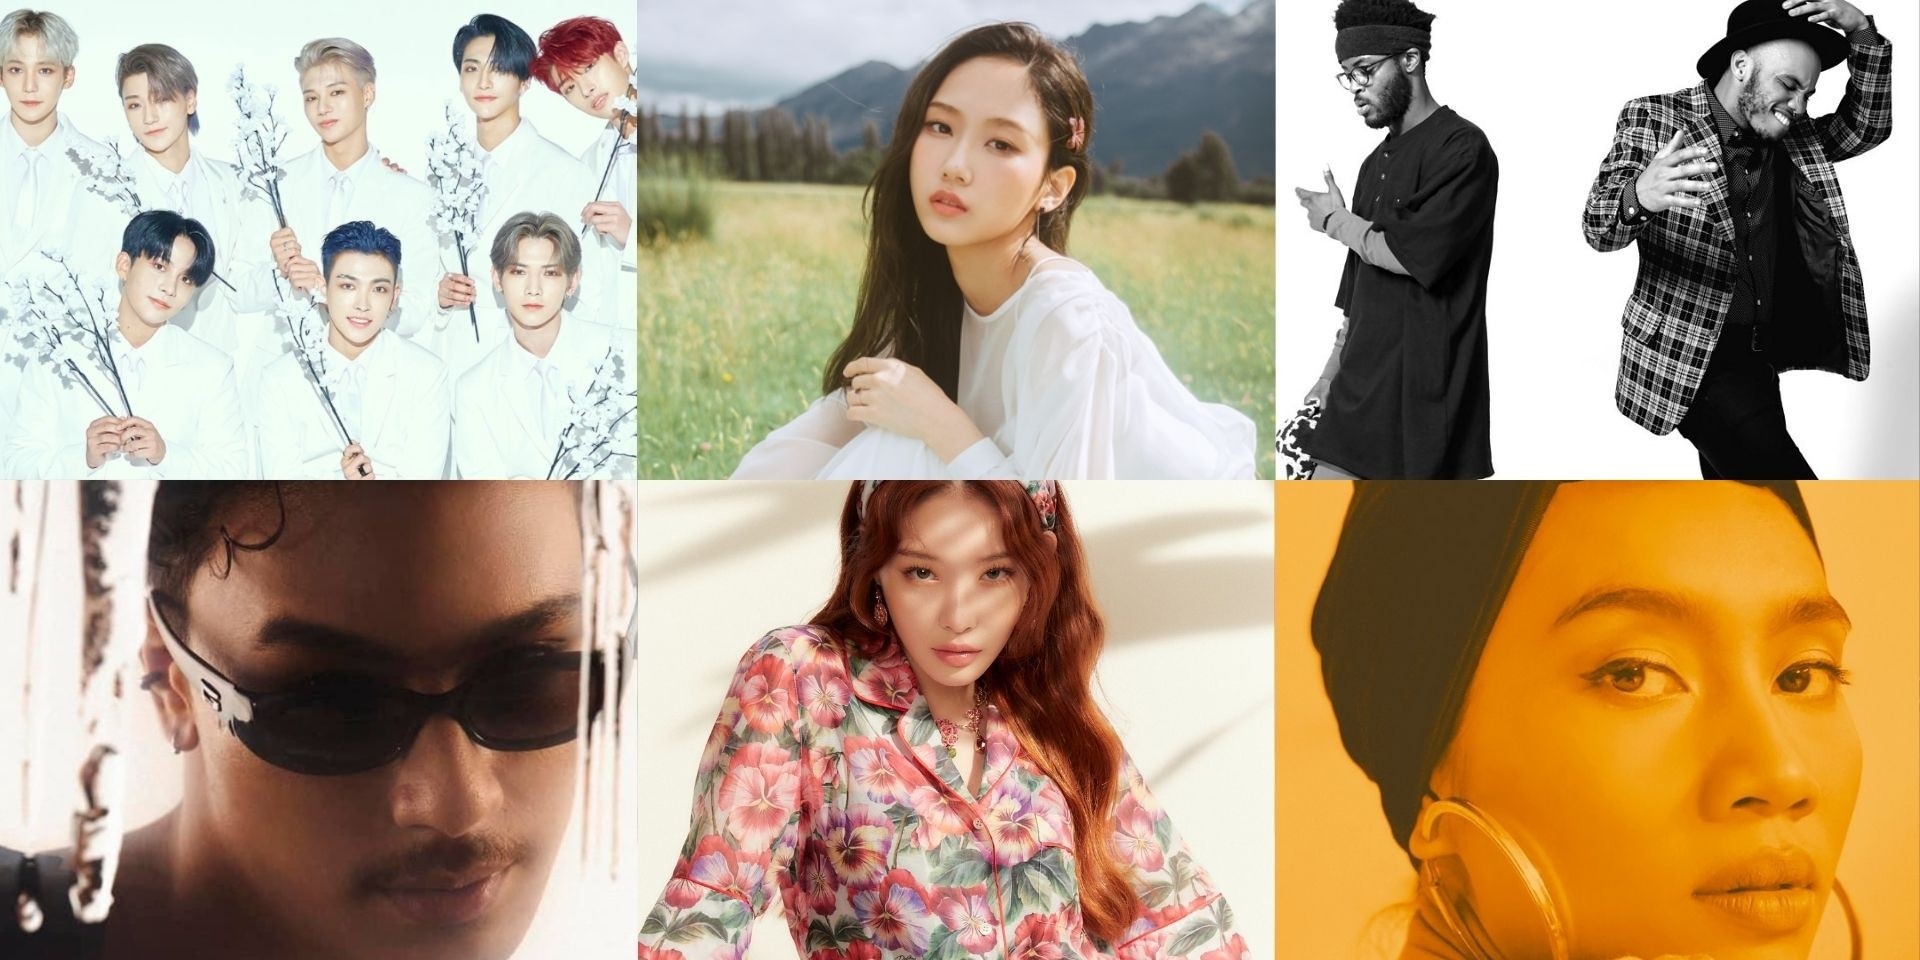 New live concert platform Eastern Standard Time to make debut with DOUBLE HAPPINESS Winter Festival – NxWorries, CHUNG HA, Seori, Jason Dhakal, Yuna, ATEEZ, and more on the lineup